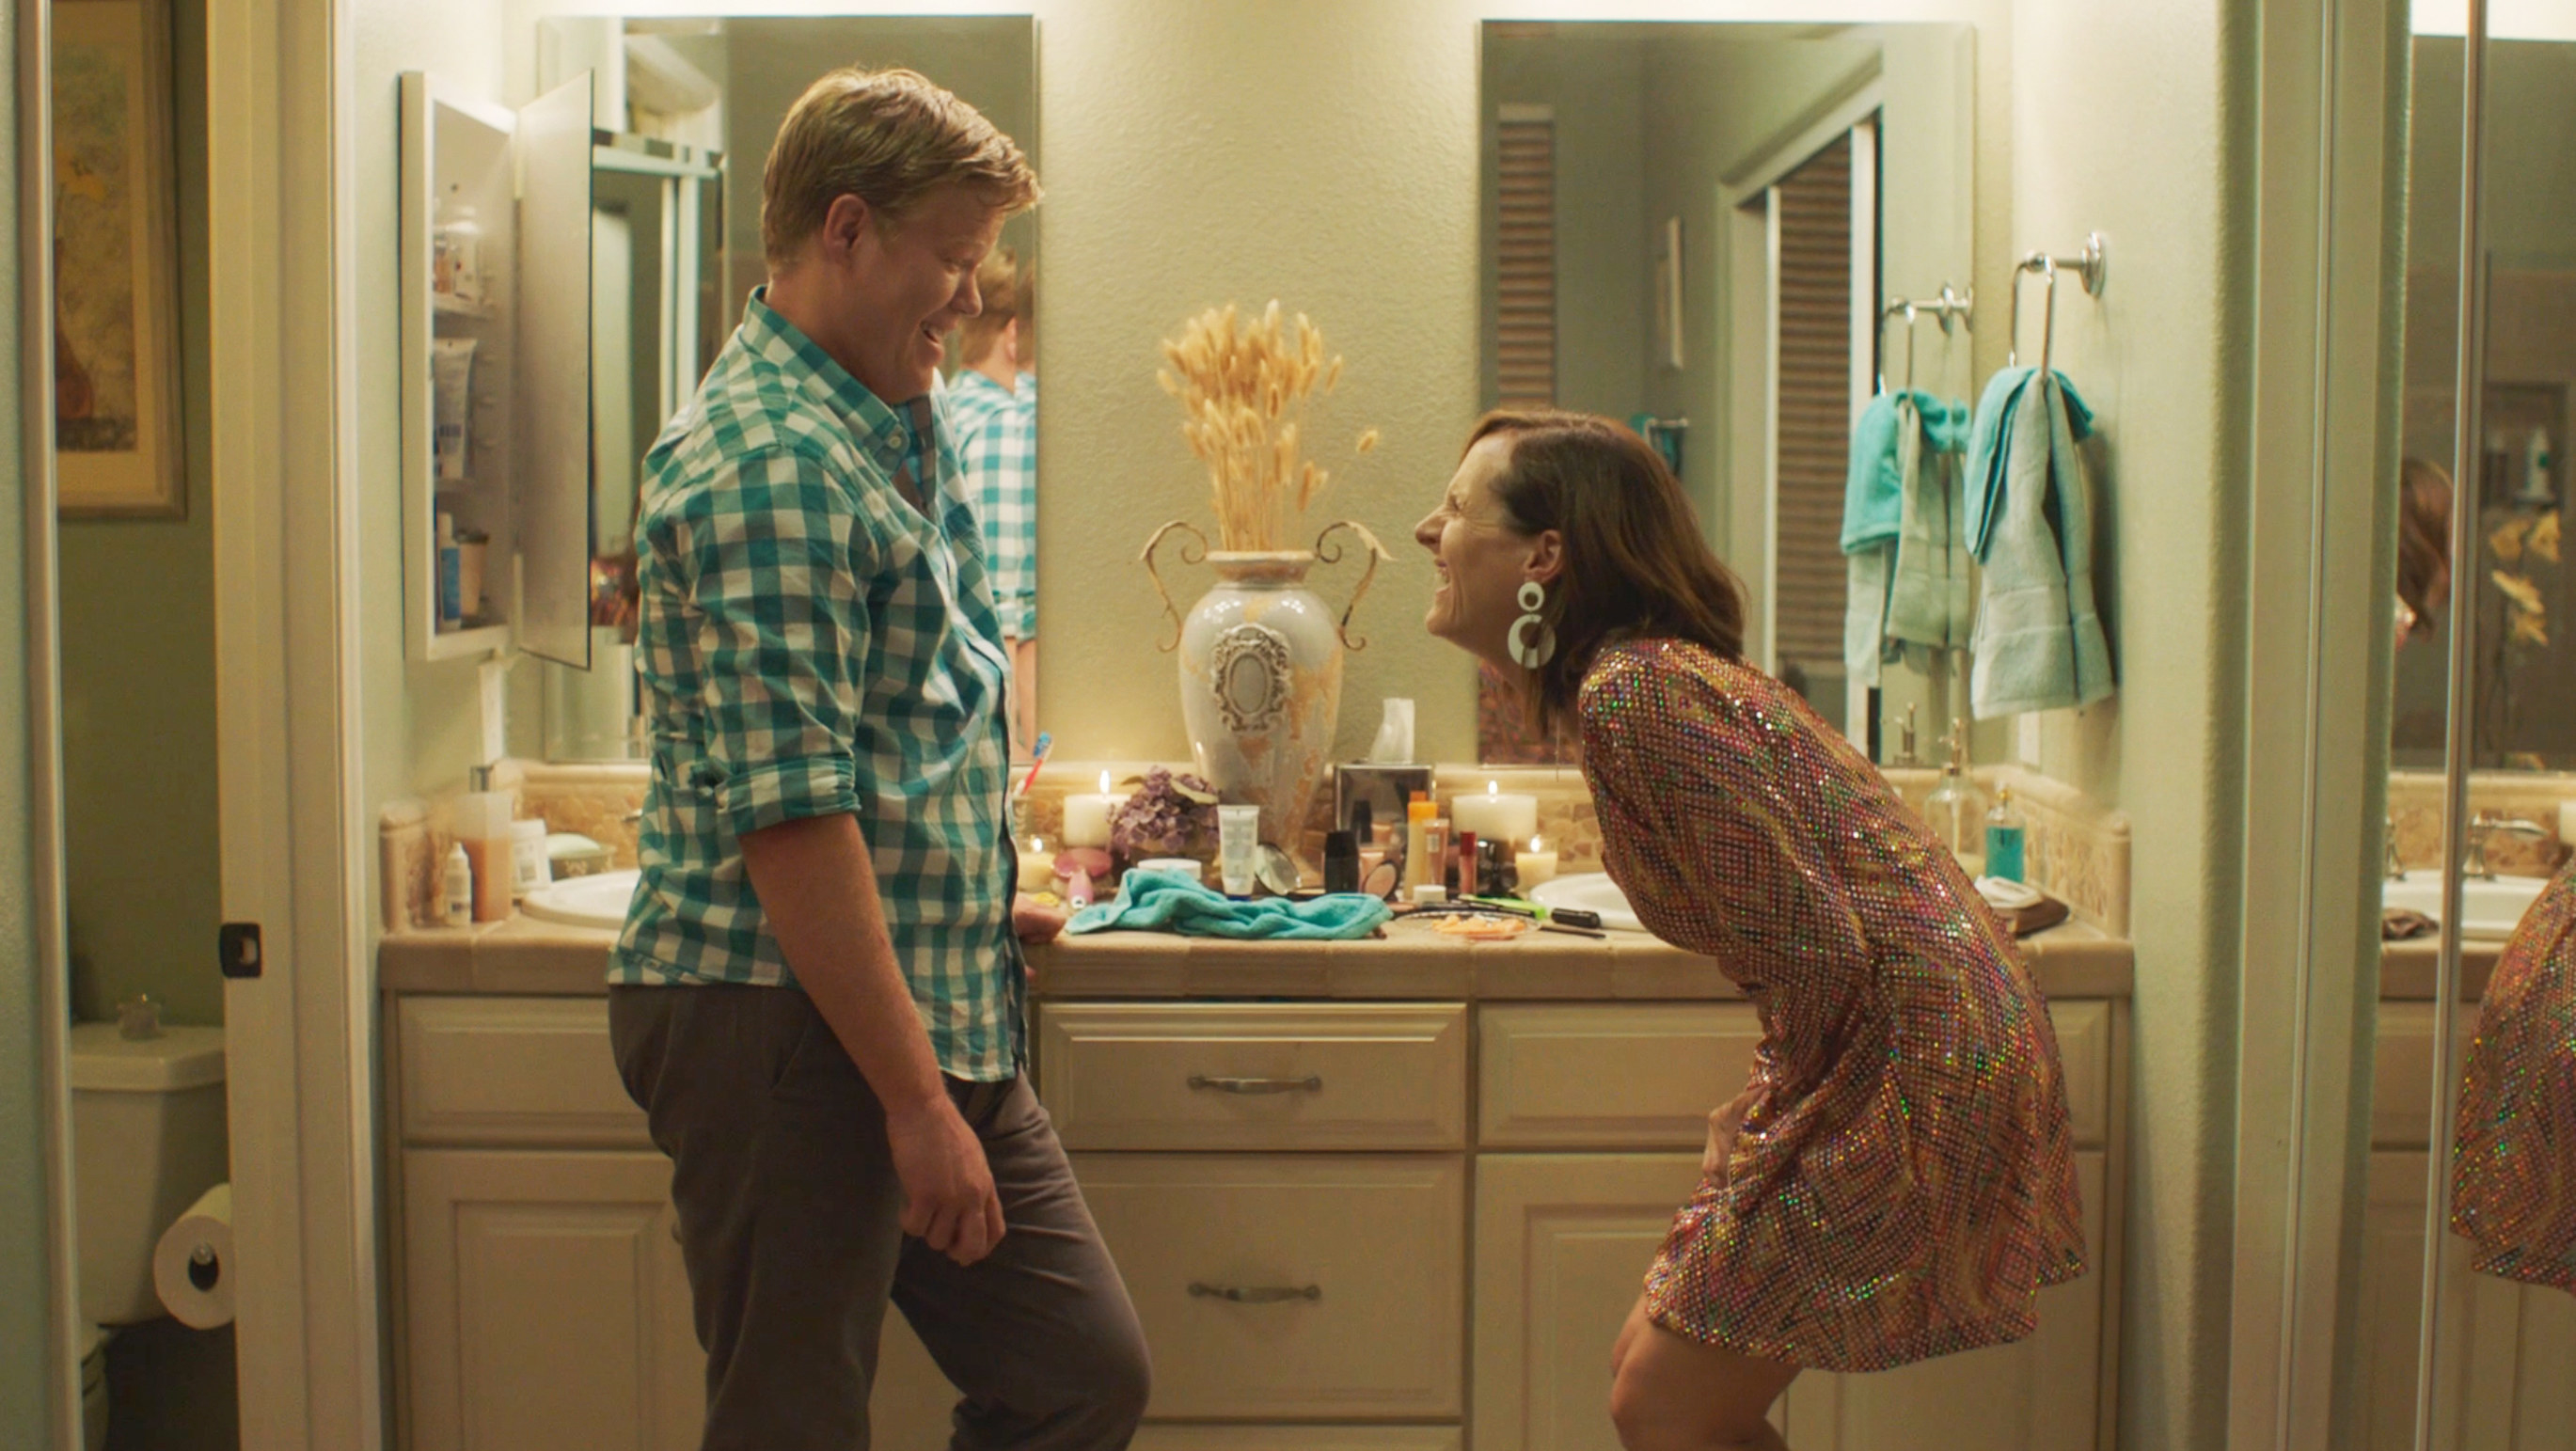 Jesse Plemons and Molly Shannon laugh together in a bathroom